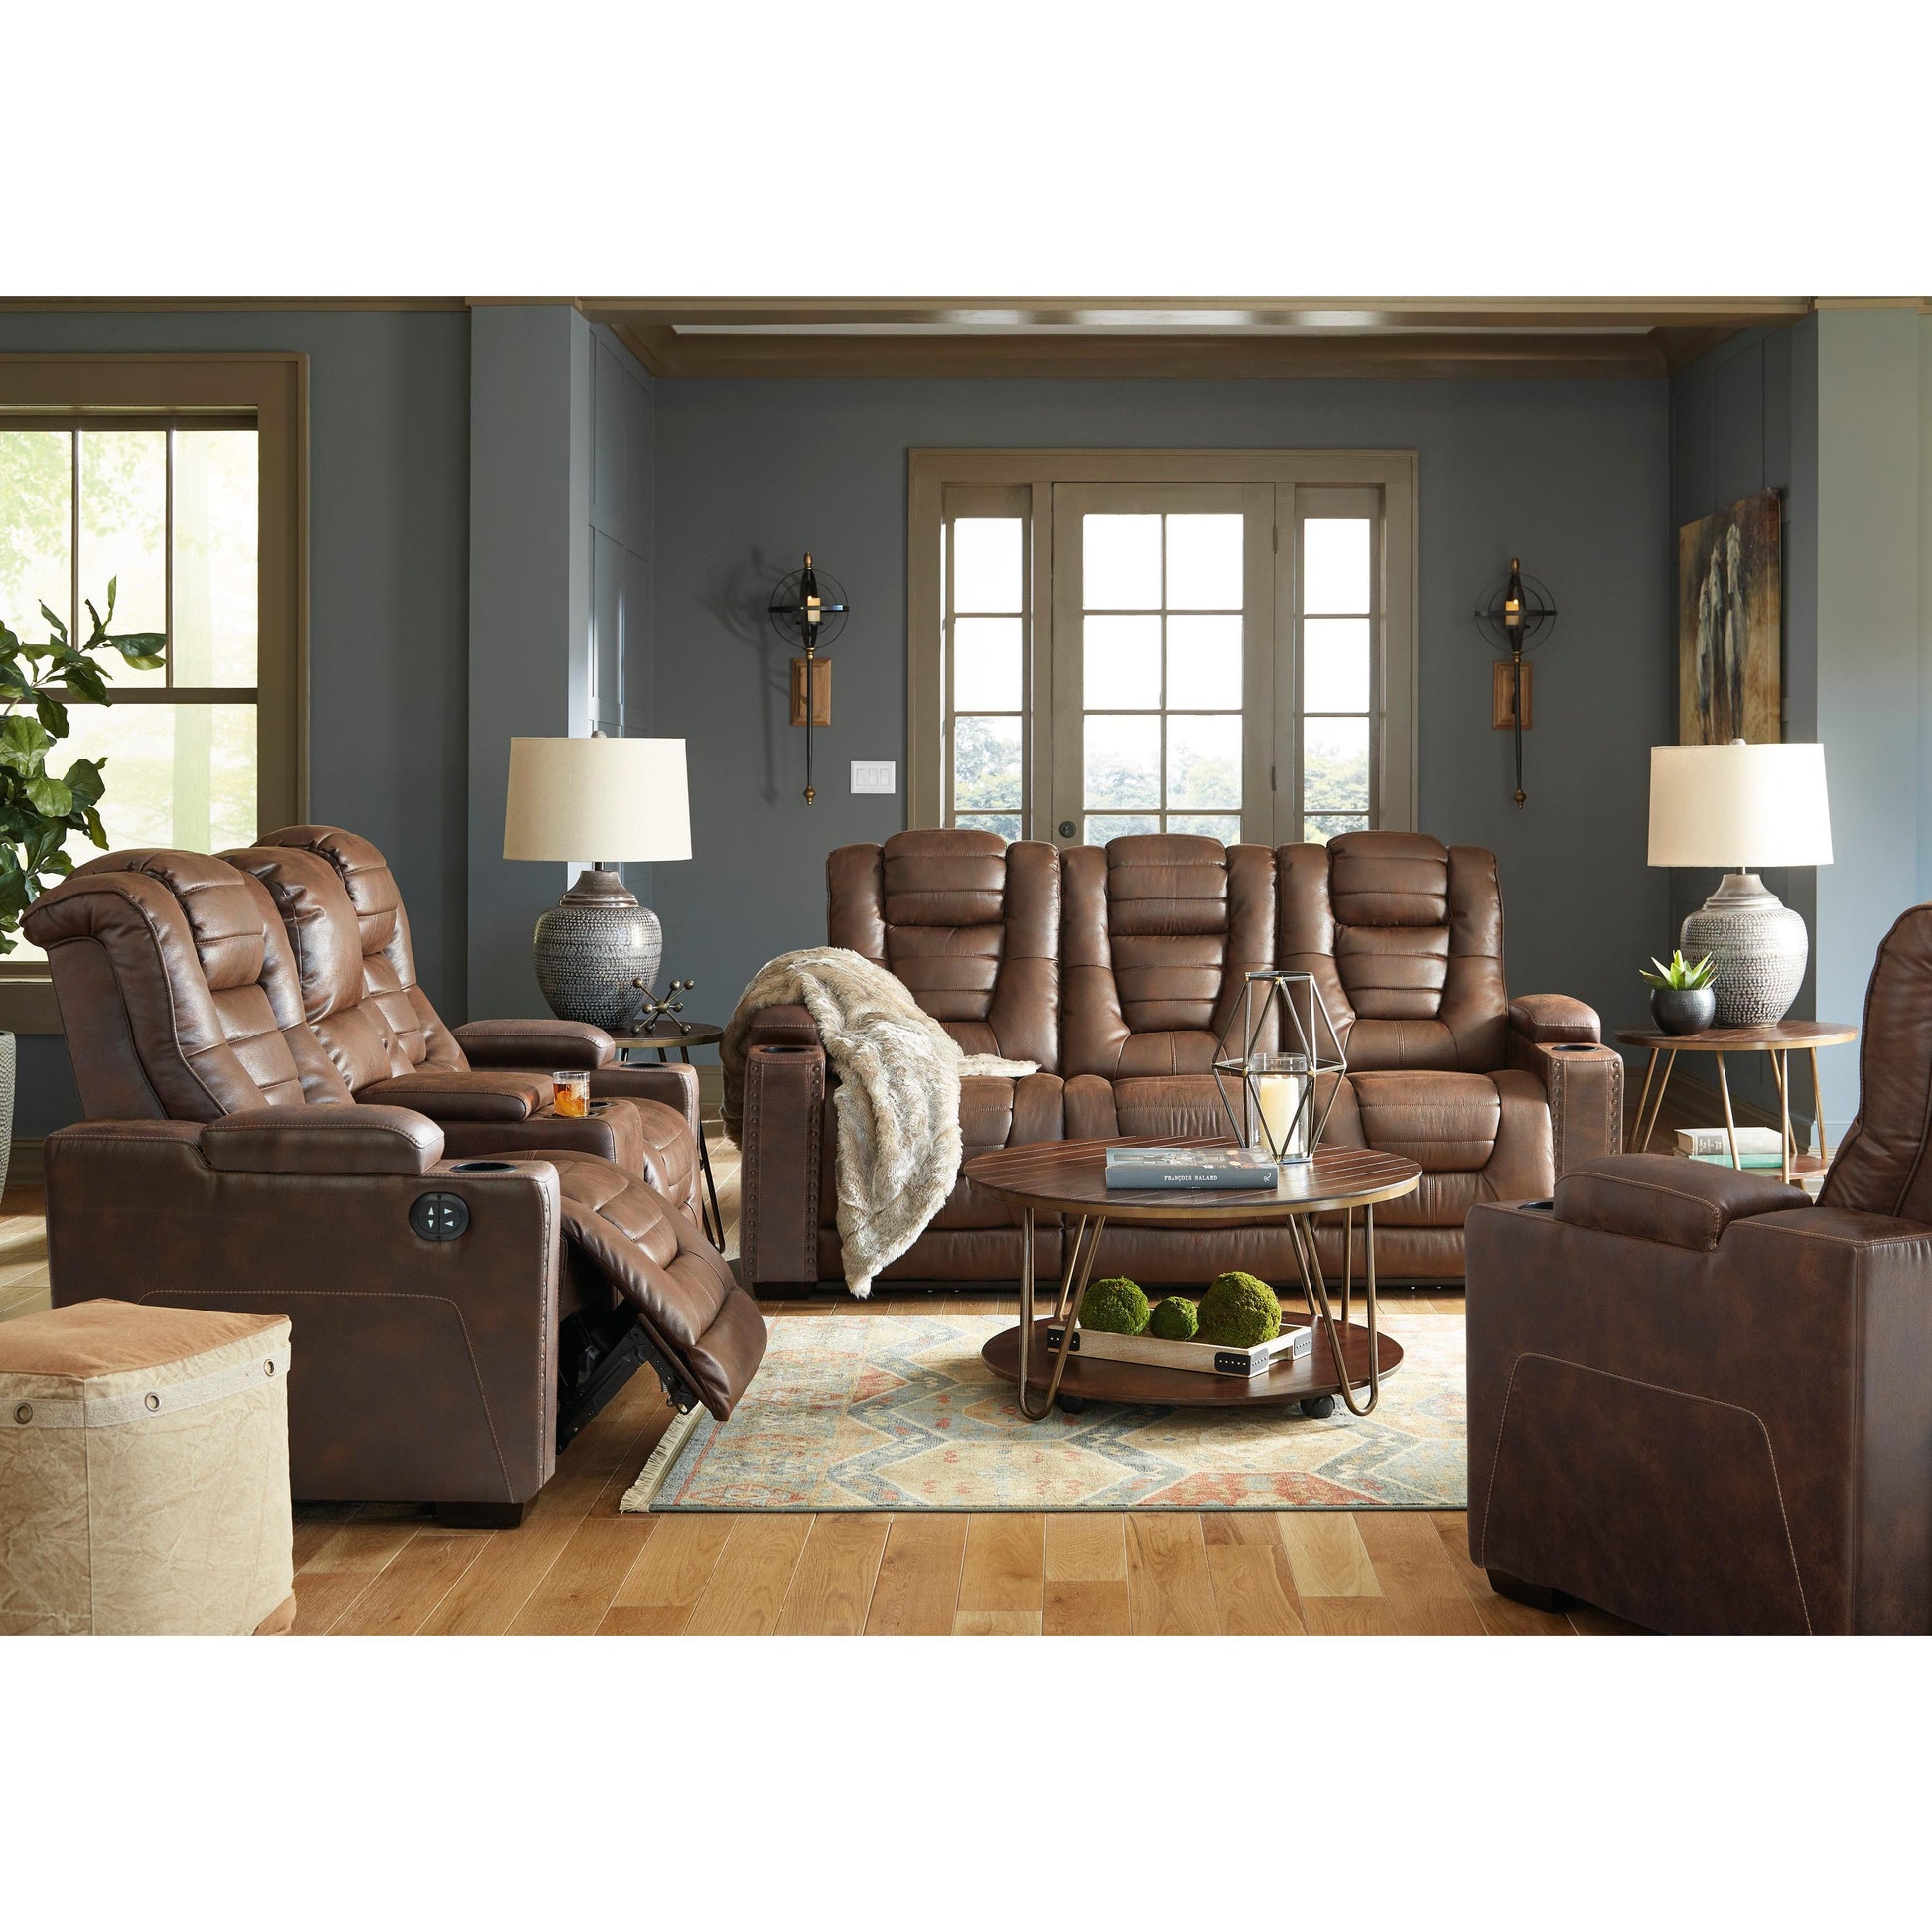 Signature Design by Ashley Owner's Box 24505U2 2 pc Power Reclining Living Room Set IMAGE 1